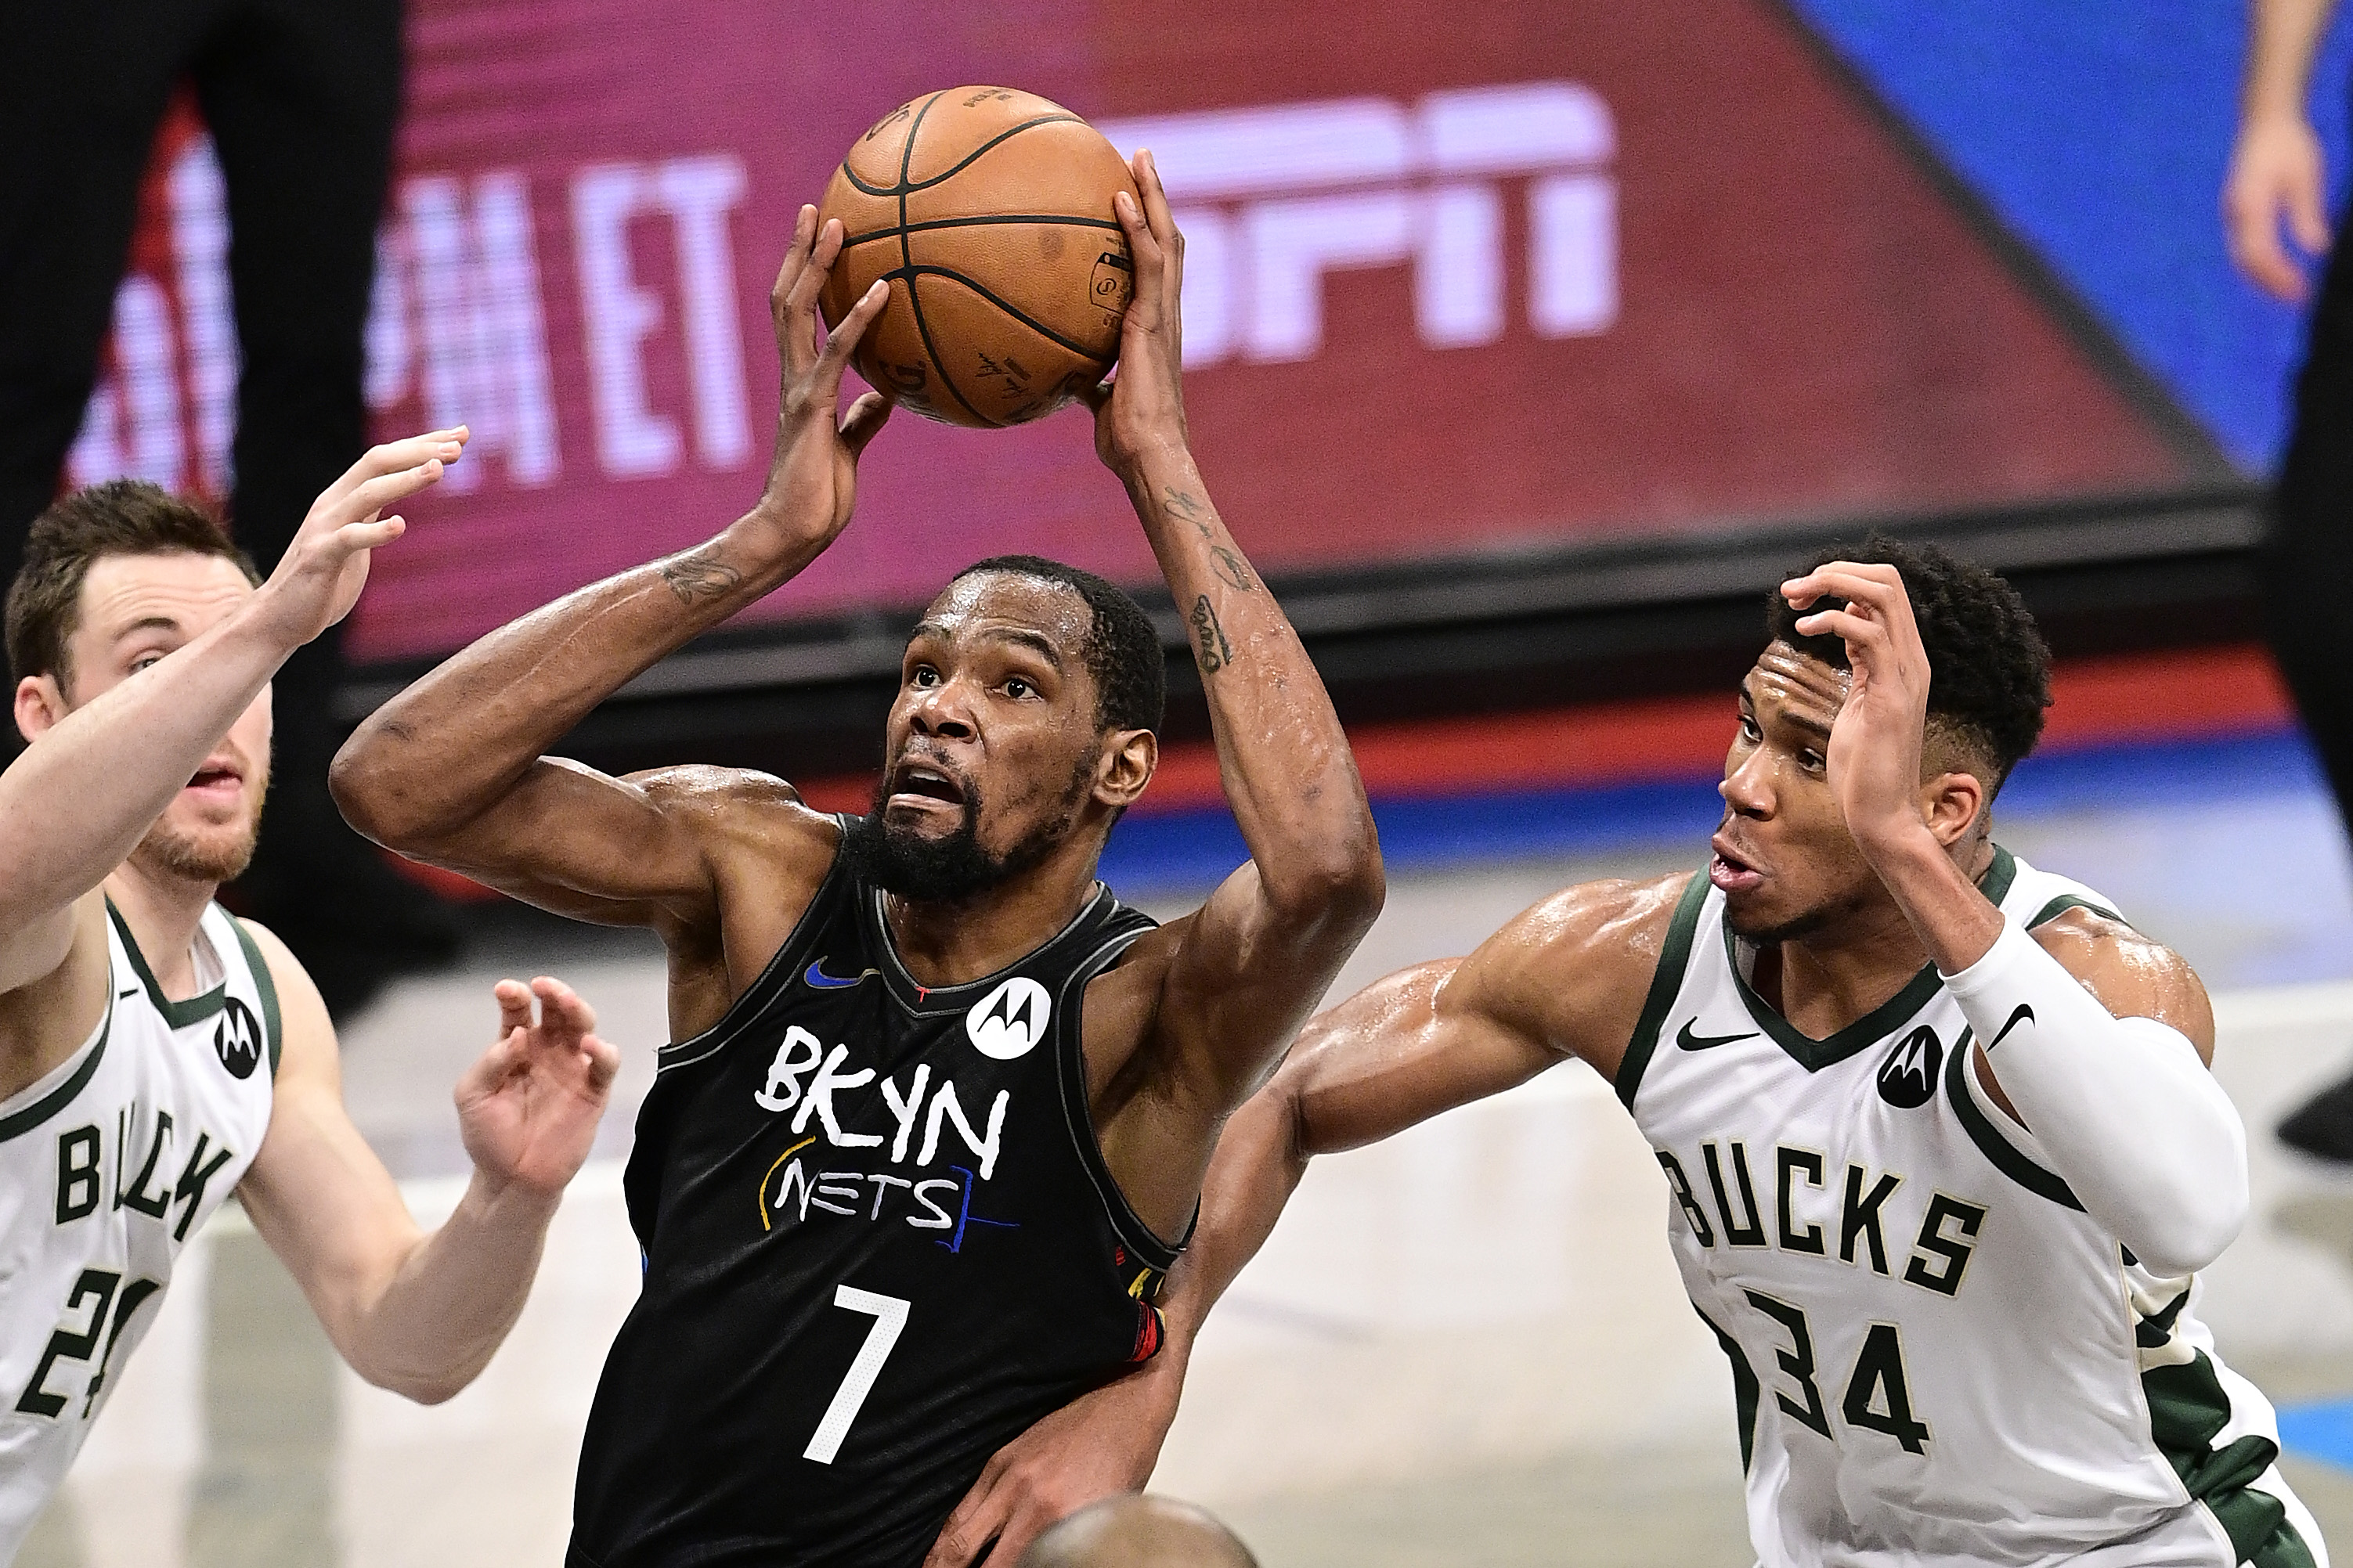 Brooklyn Nets at Milwaukee Bucks Game 4 free live stream (6/13/21) How to watch NBA, time, channel